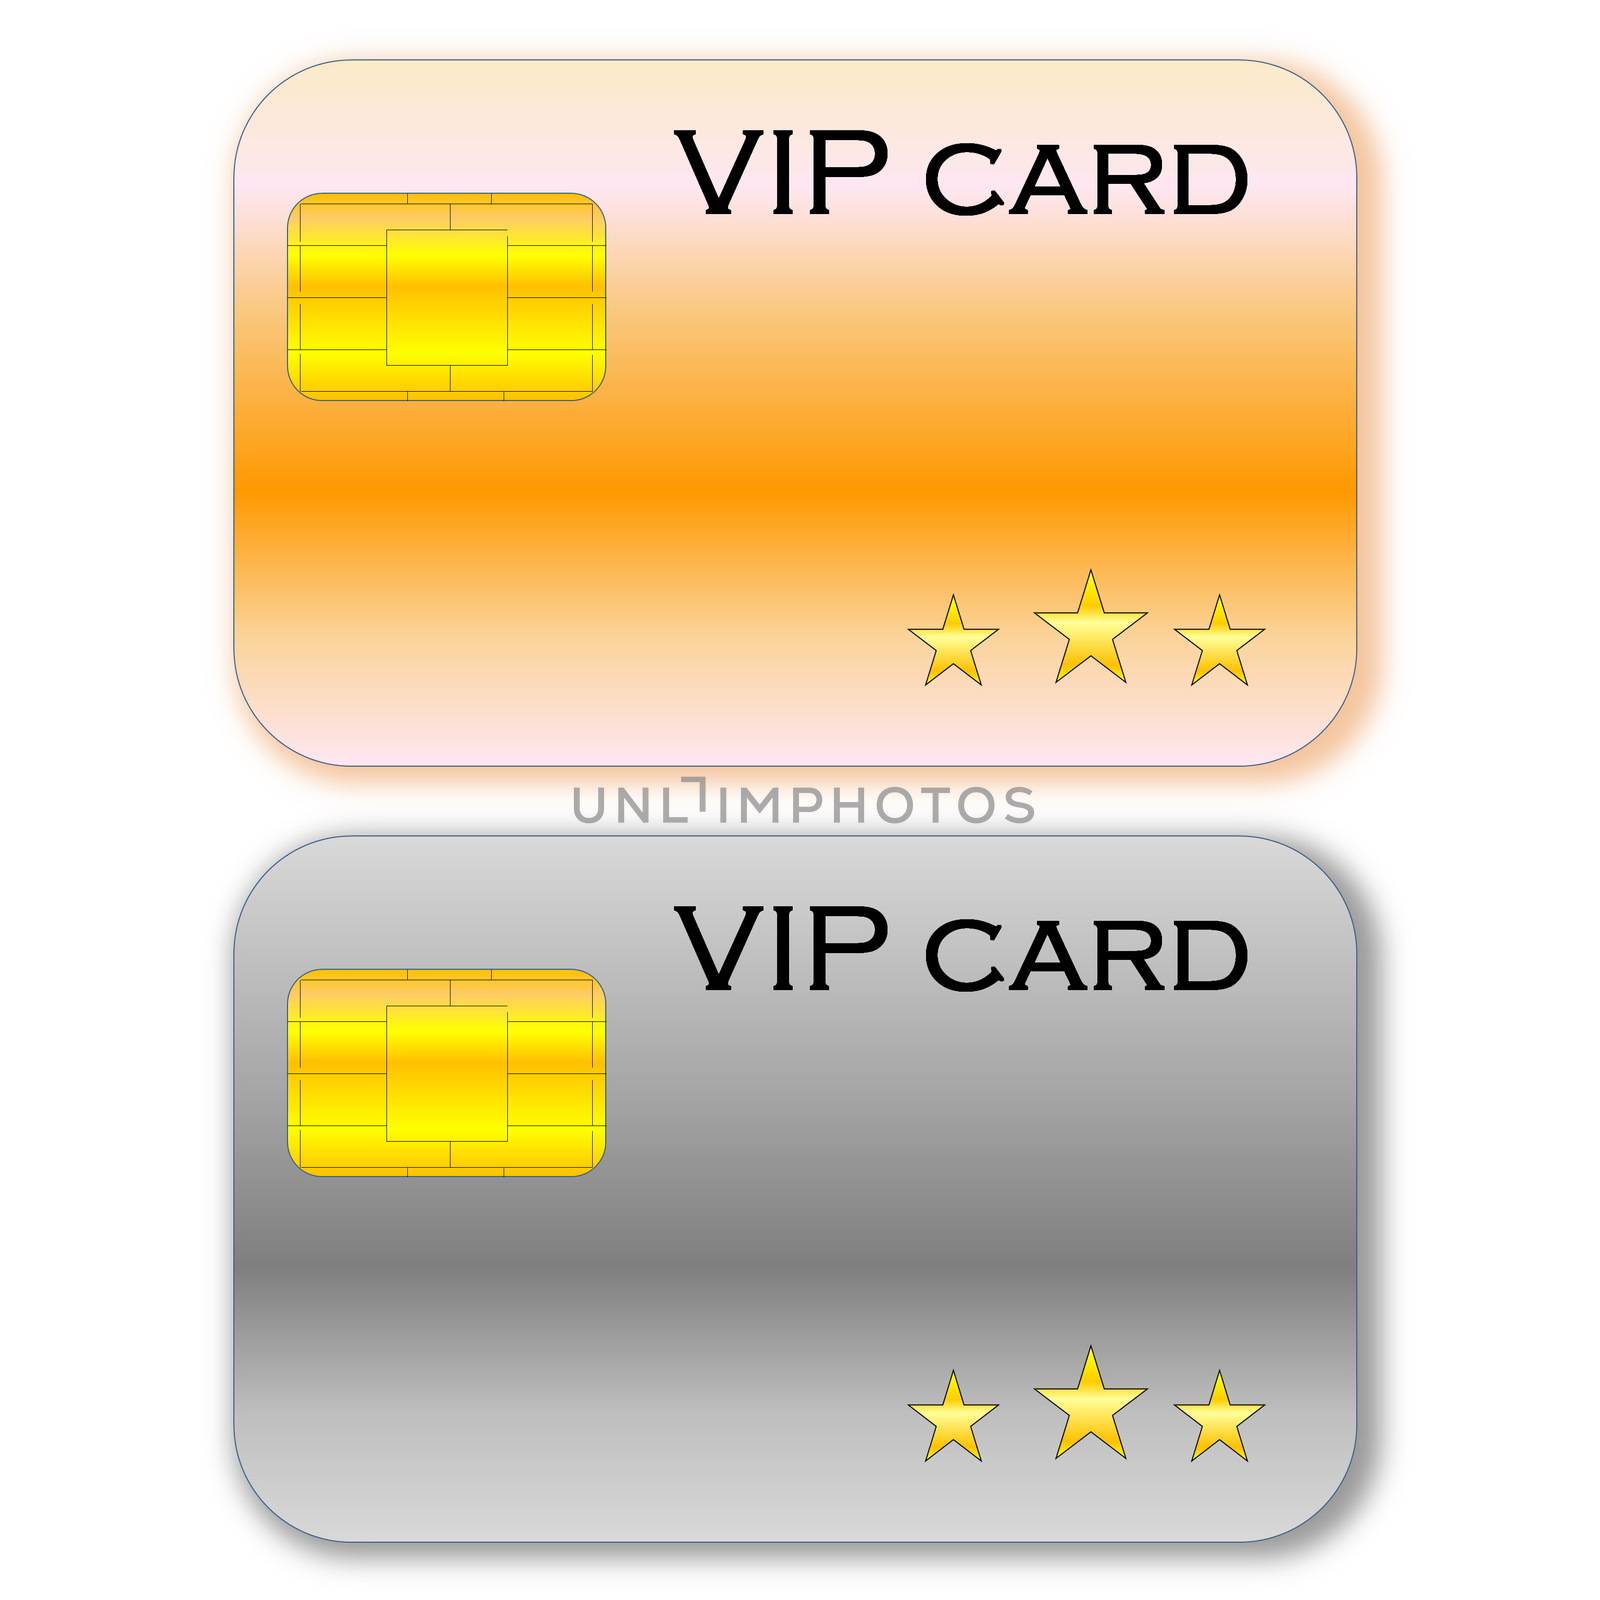 Golden and grey VIP card with chip in white background